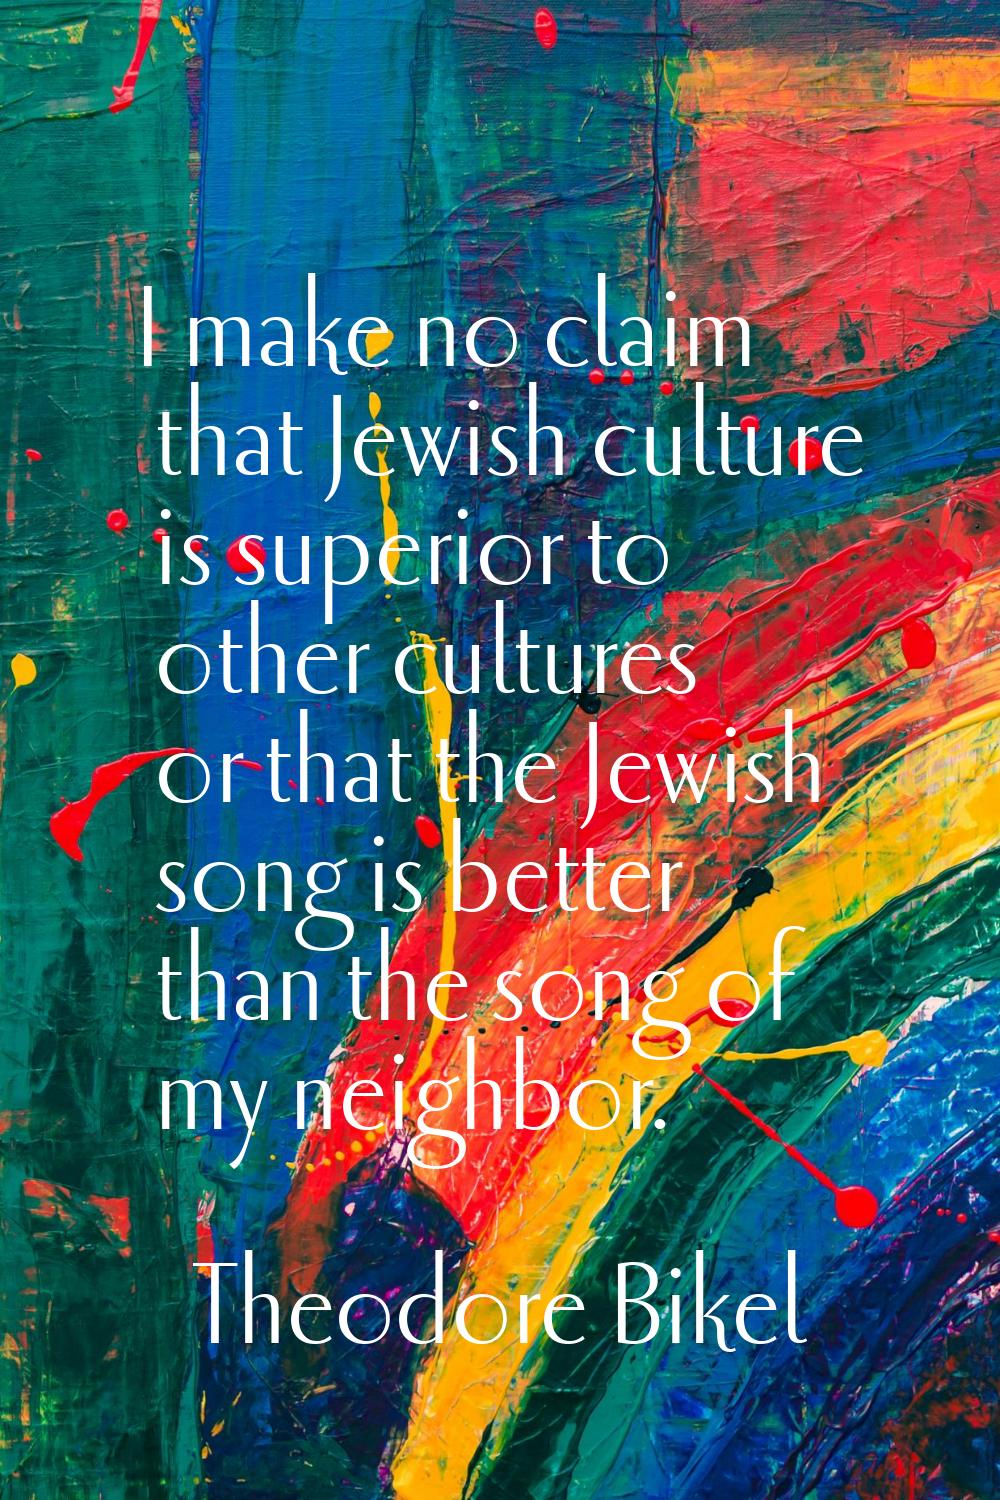 I make no claim that Jewish culture is superior to other cultures or that the Jewish song is better